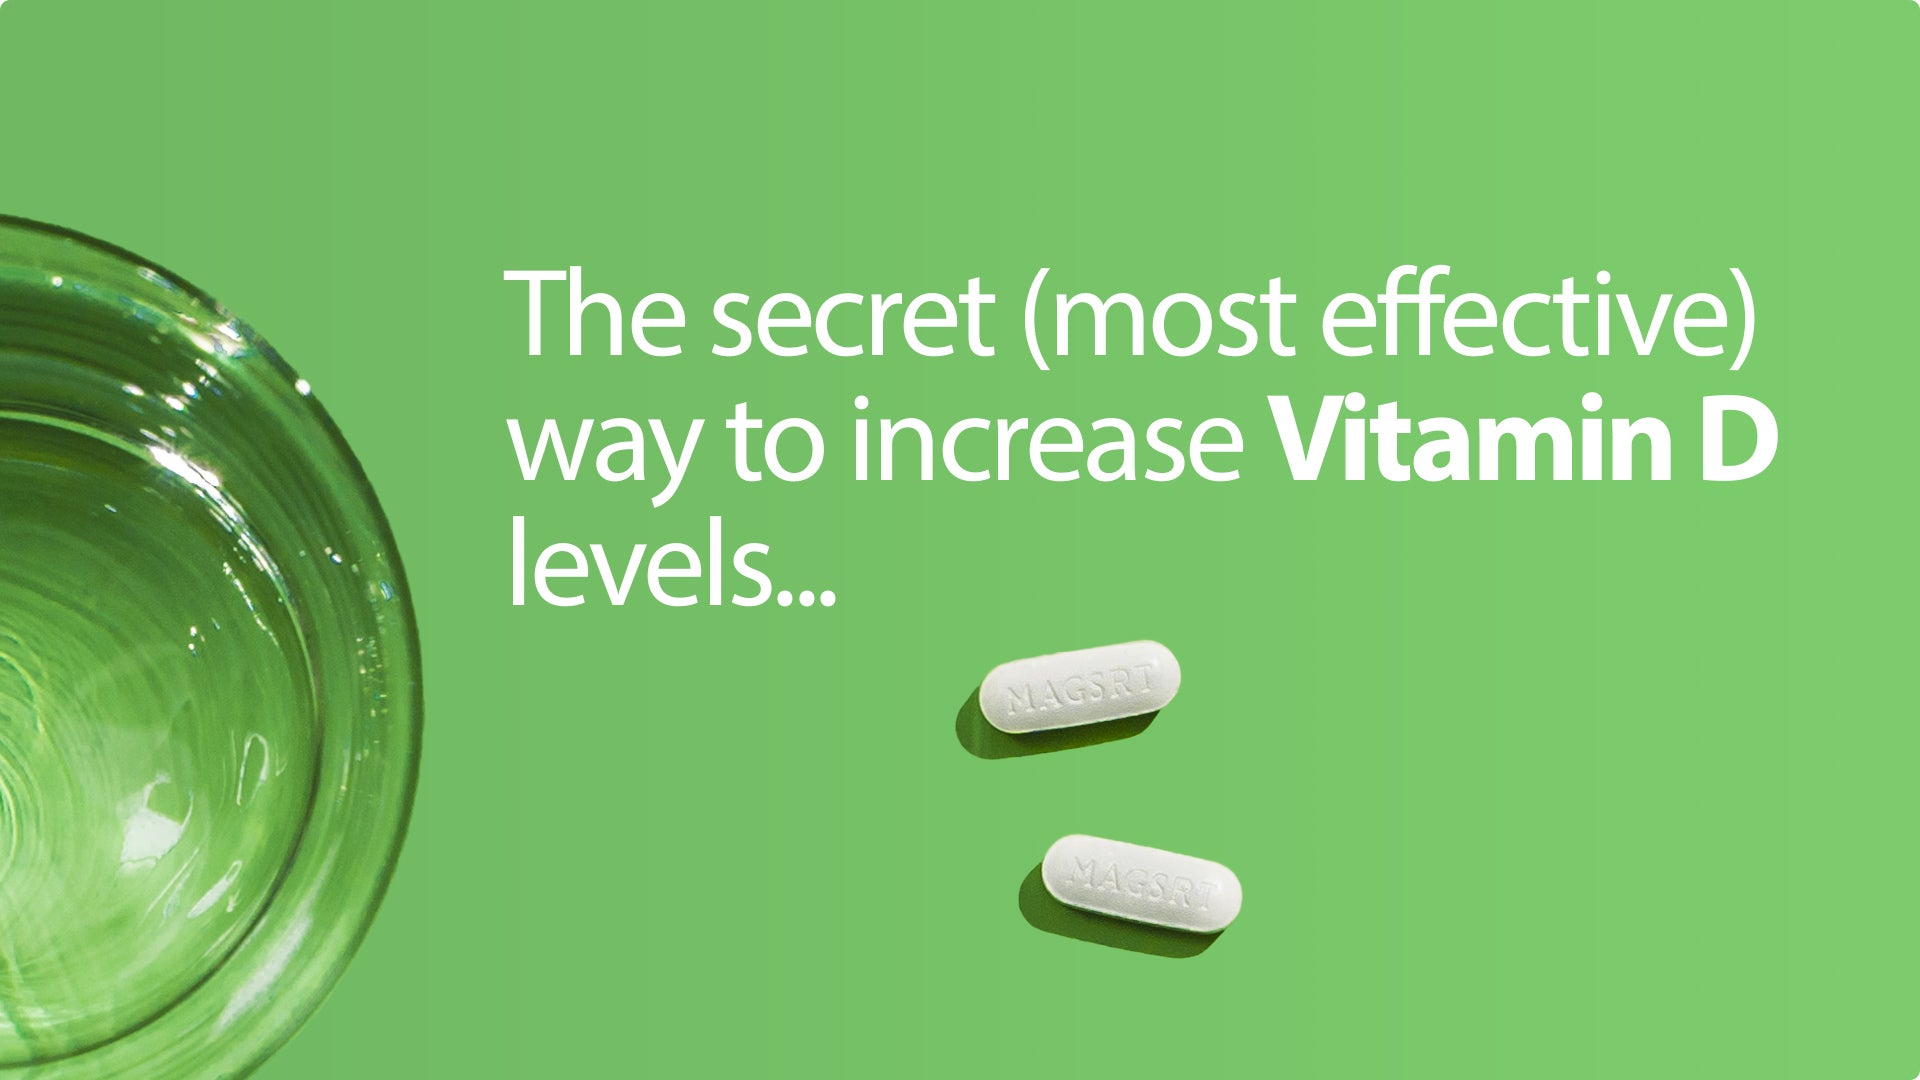 The Secret (most effective) Way to Increase Vitamin D levels...